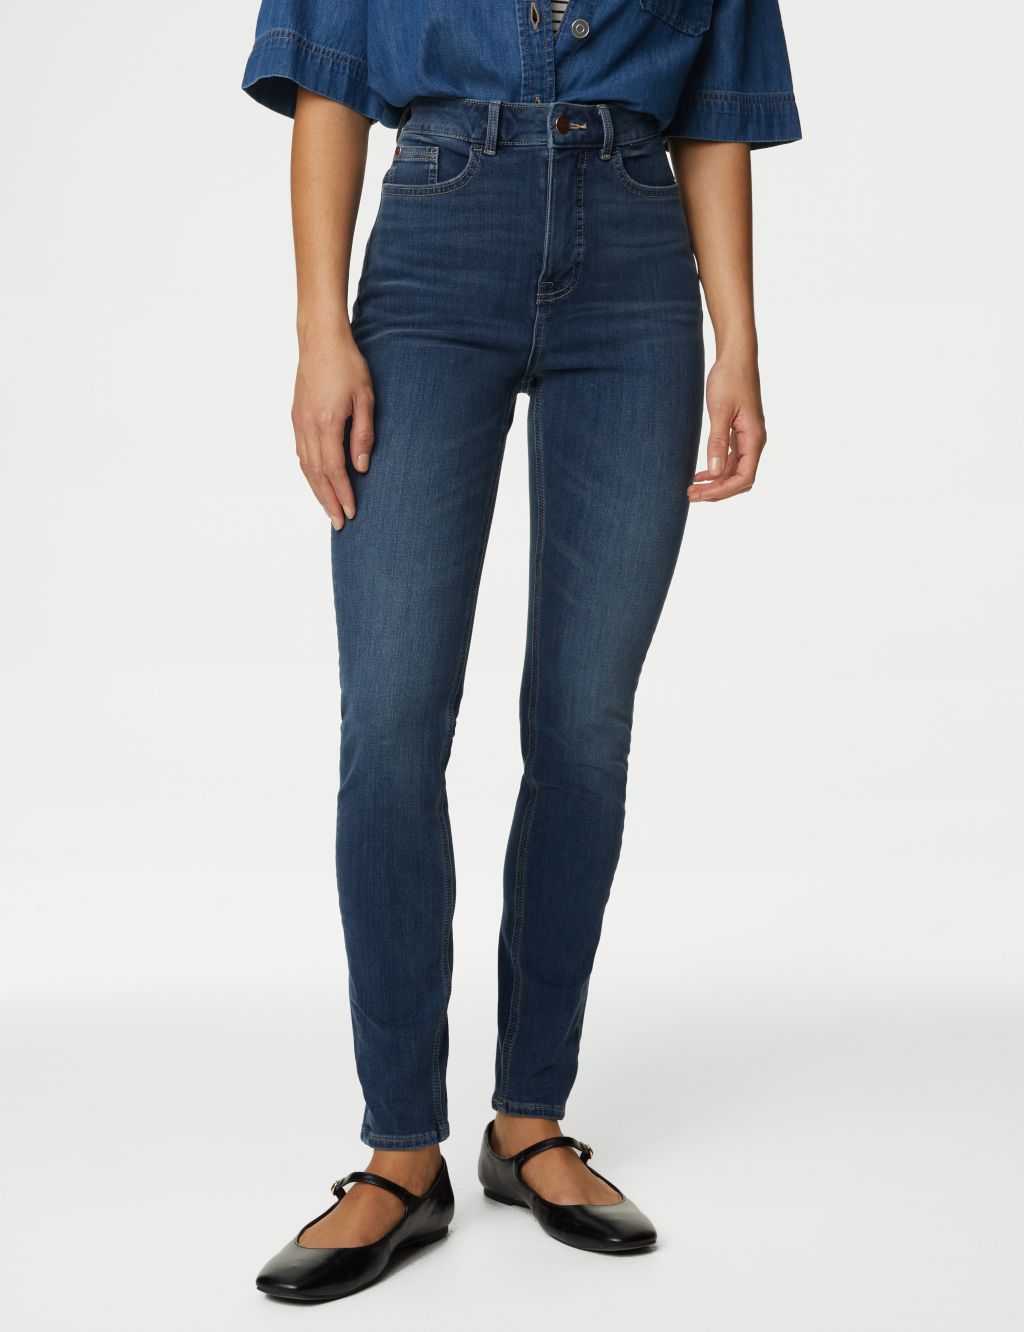 Magic Shaping High Waisted Skinny Jeans image 3